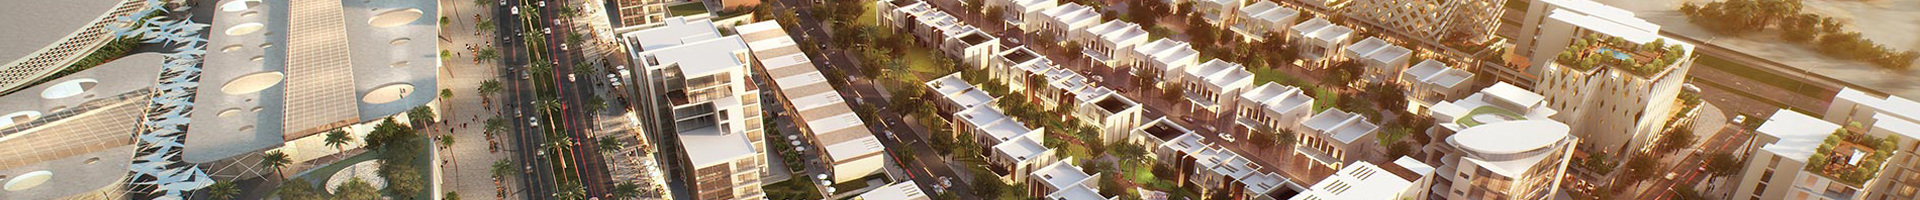 Anber Townhouses Master Plan